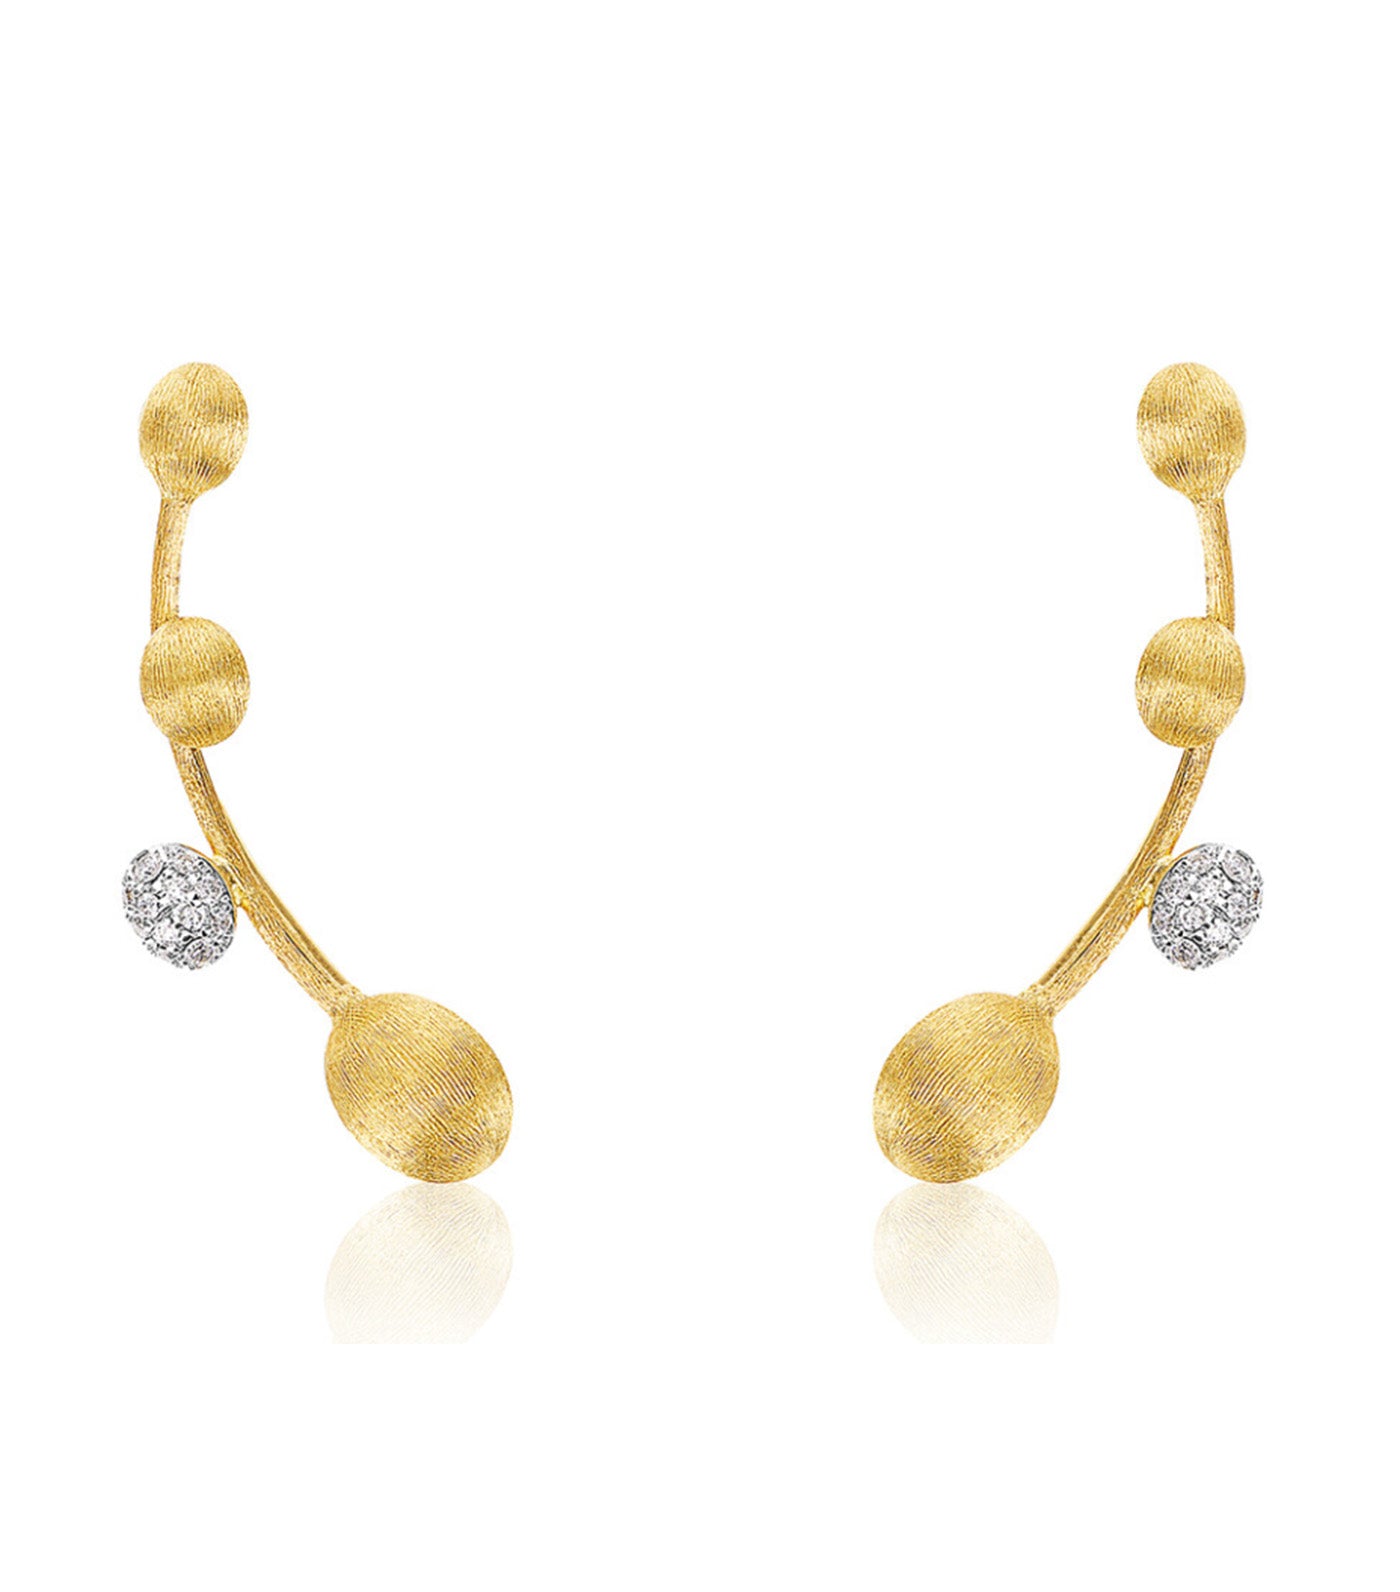 Élite Gold and Diamonds Twig-Shaped Earrings